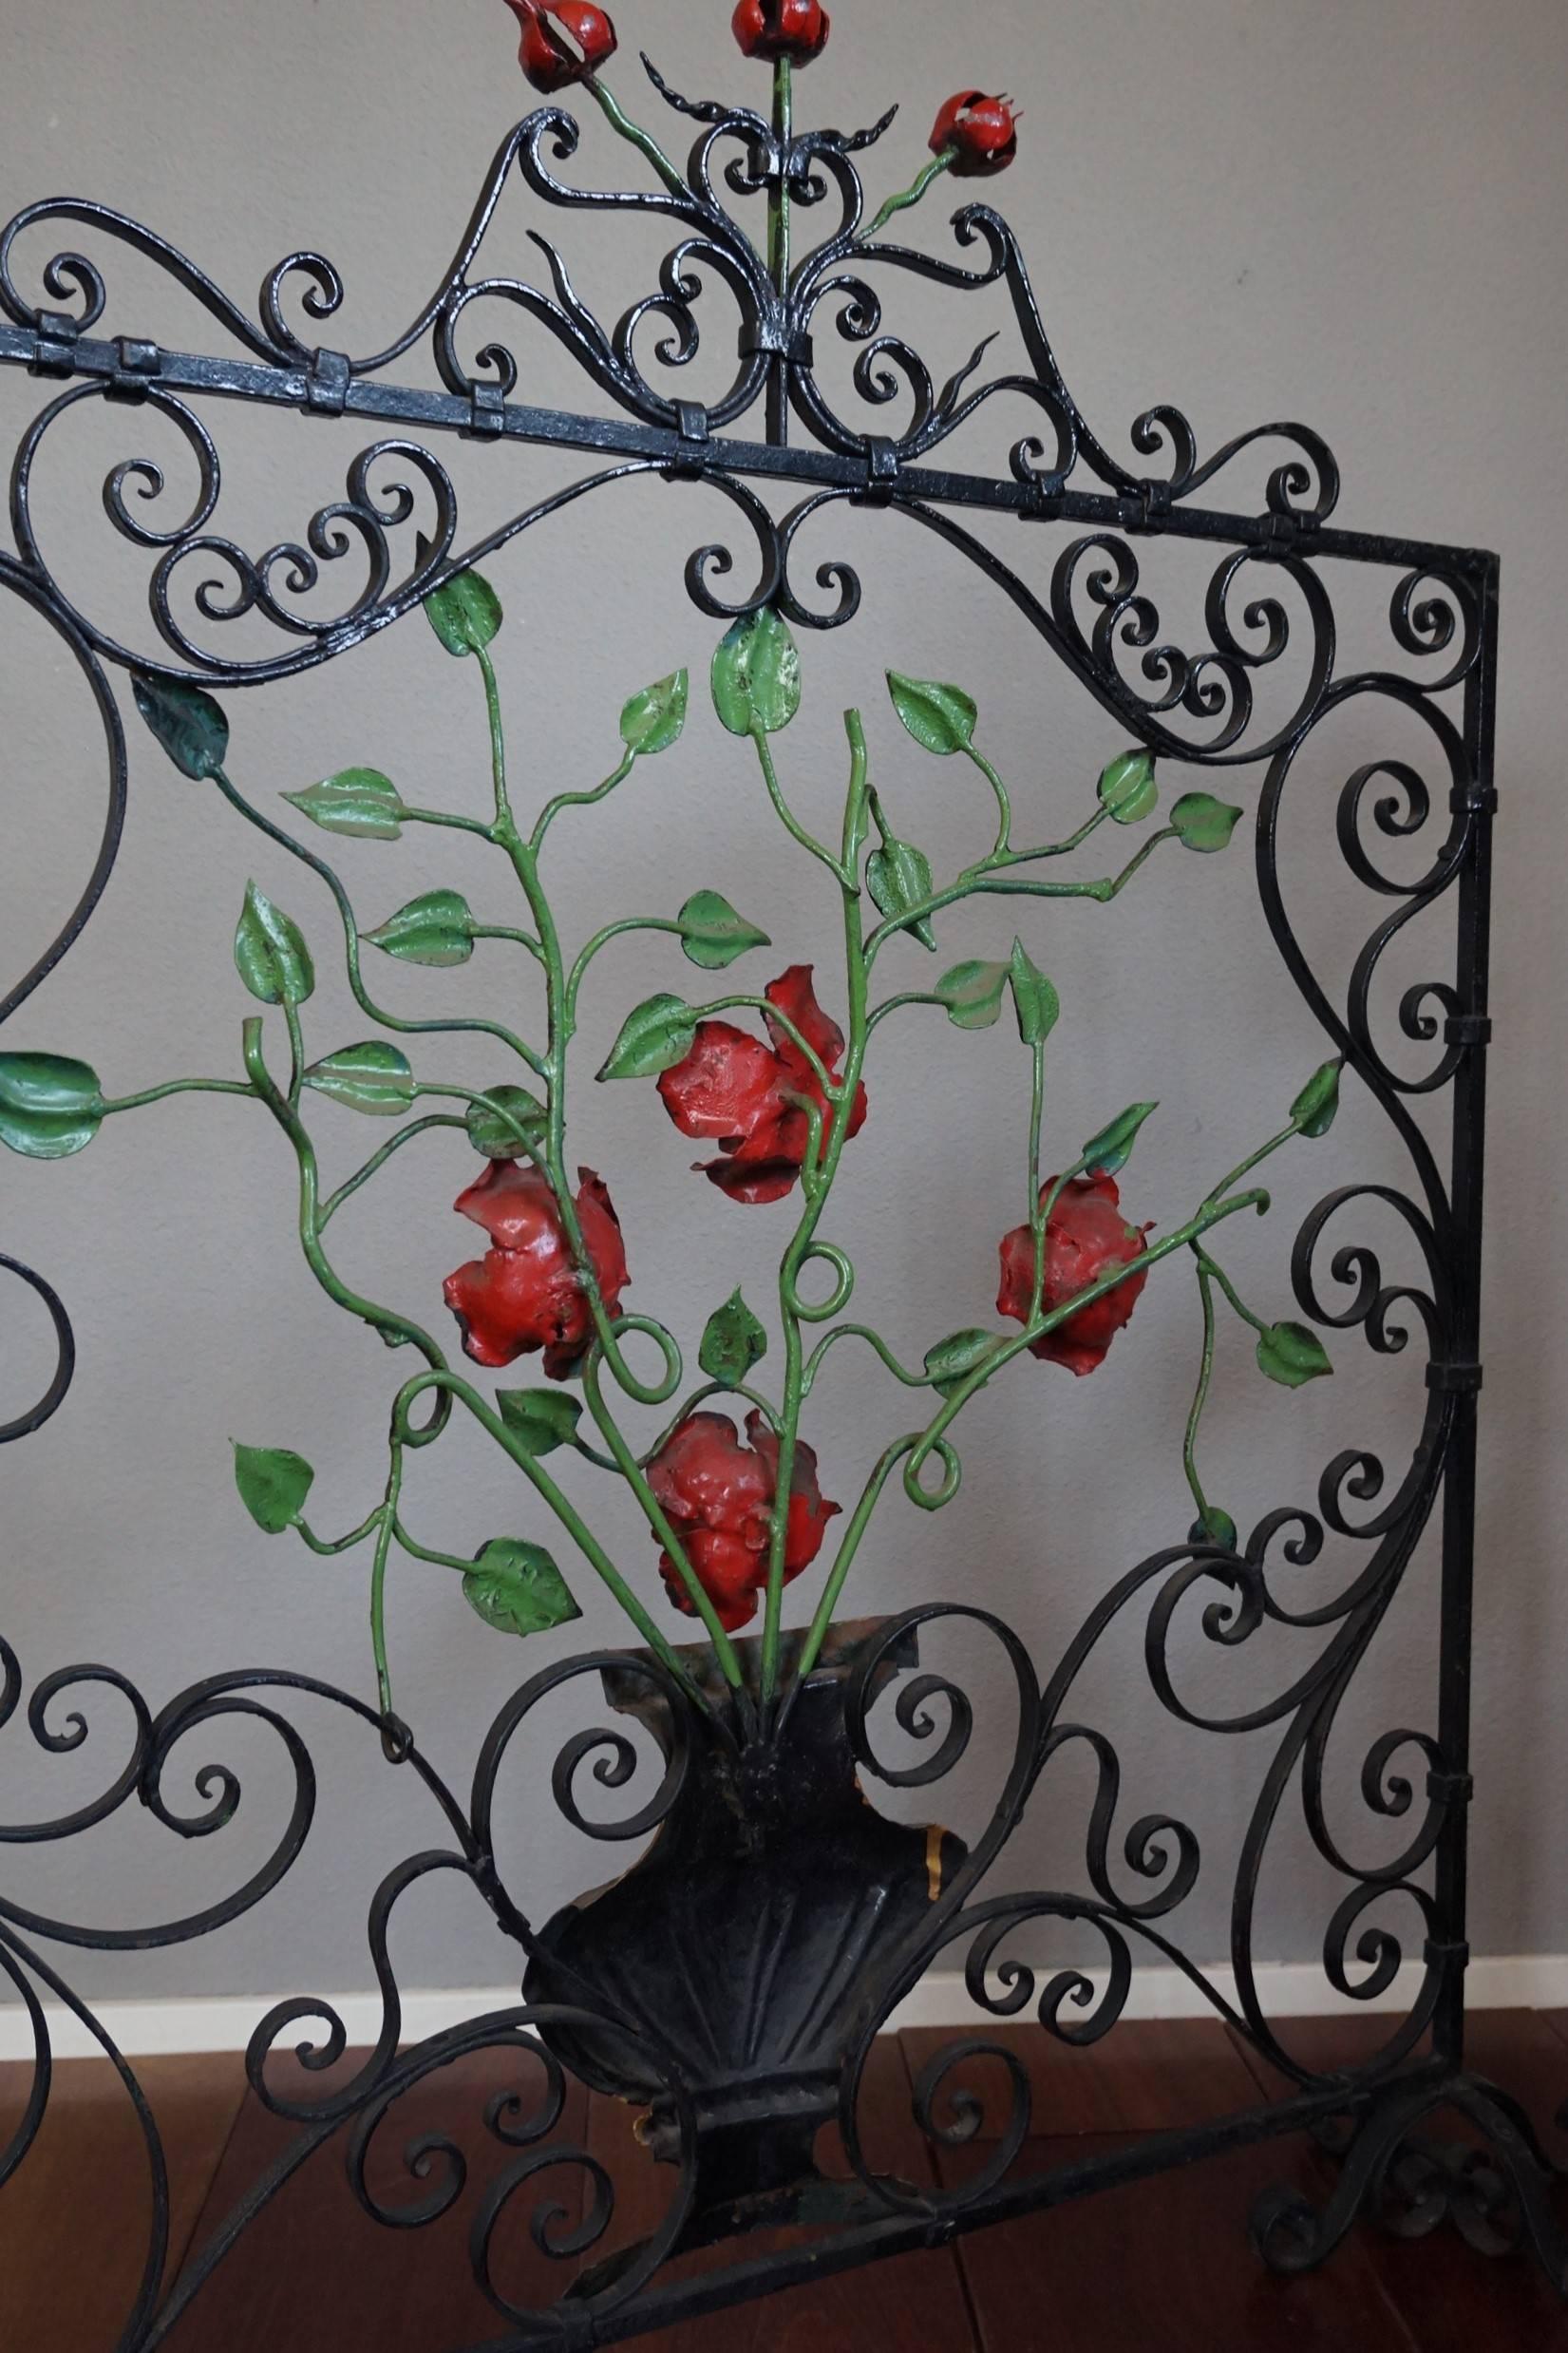 Early 20th Century Handcrafted Wrought Iron Firescreen with Roses in Vase Decor 5